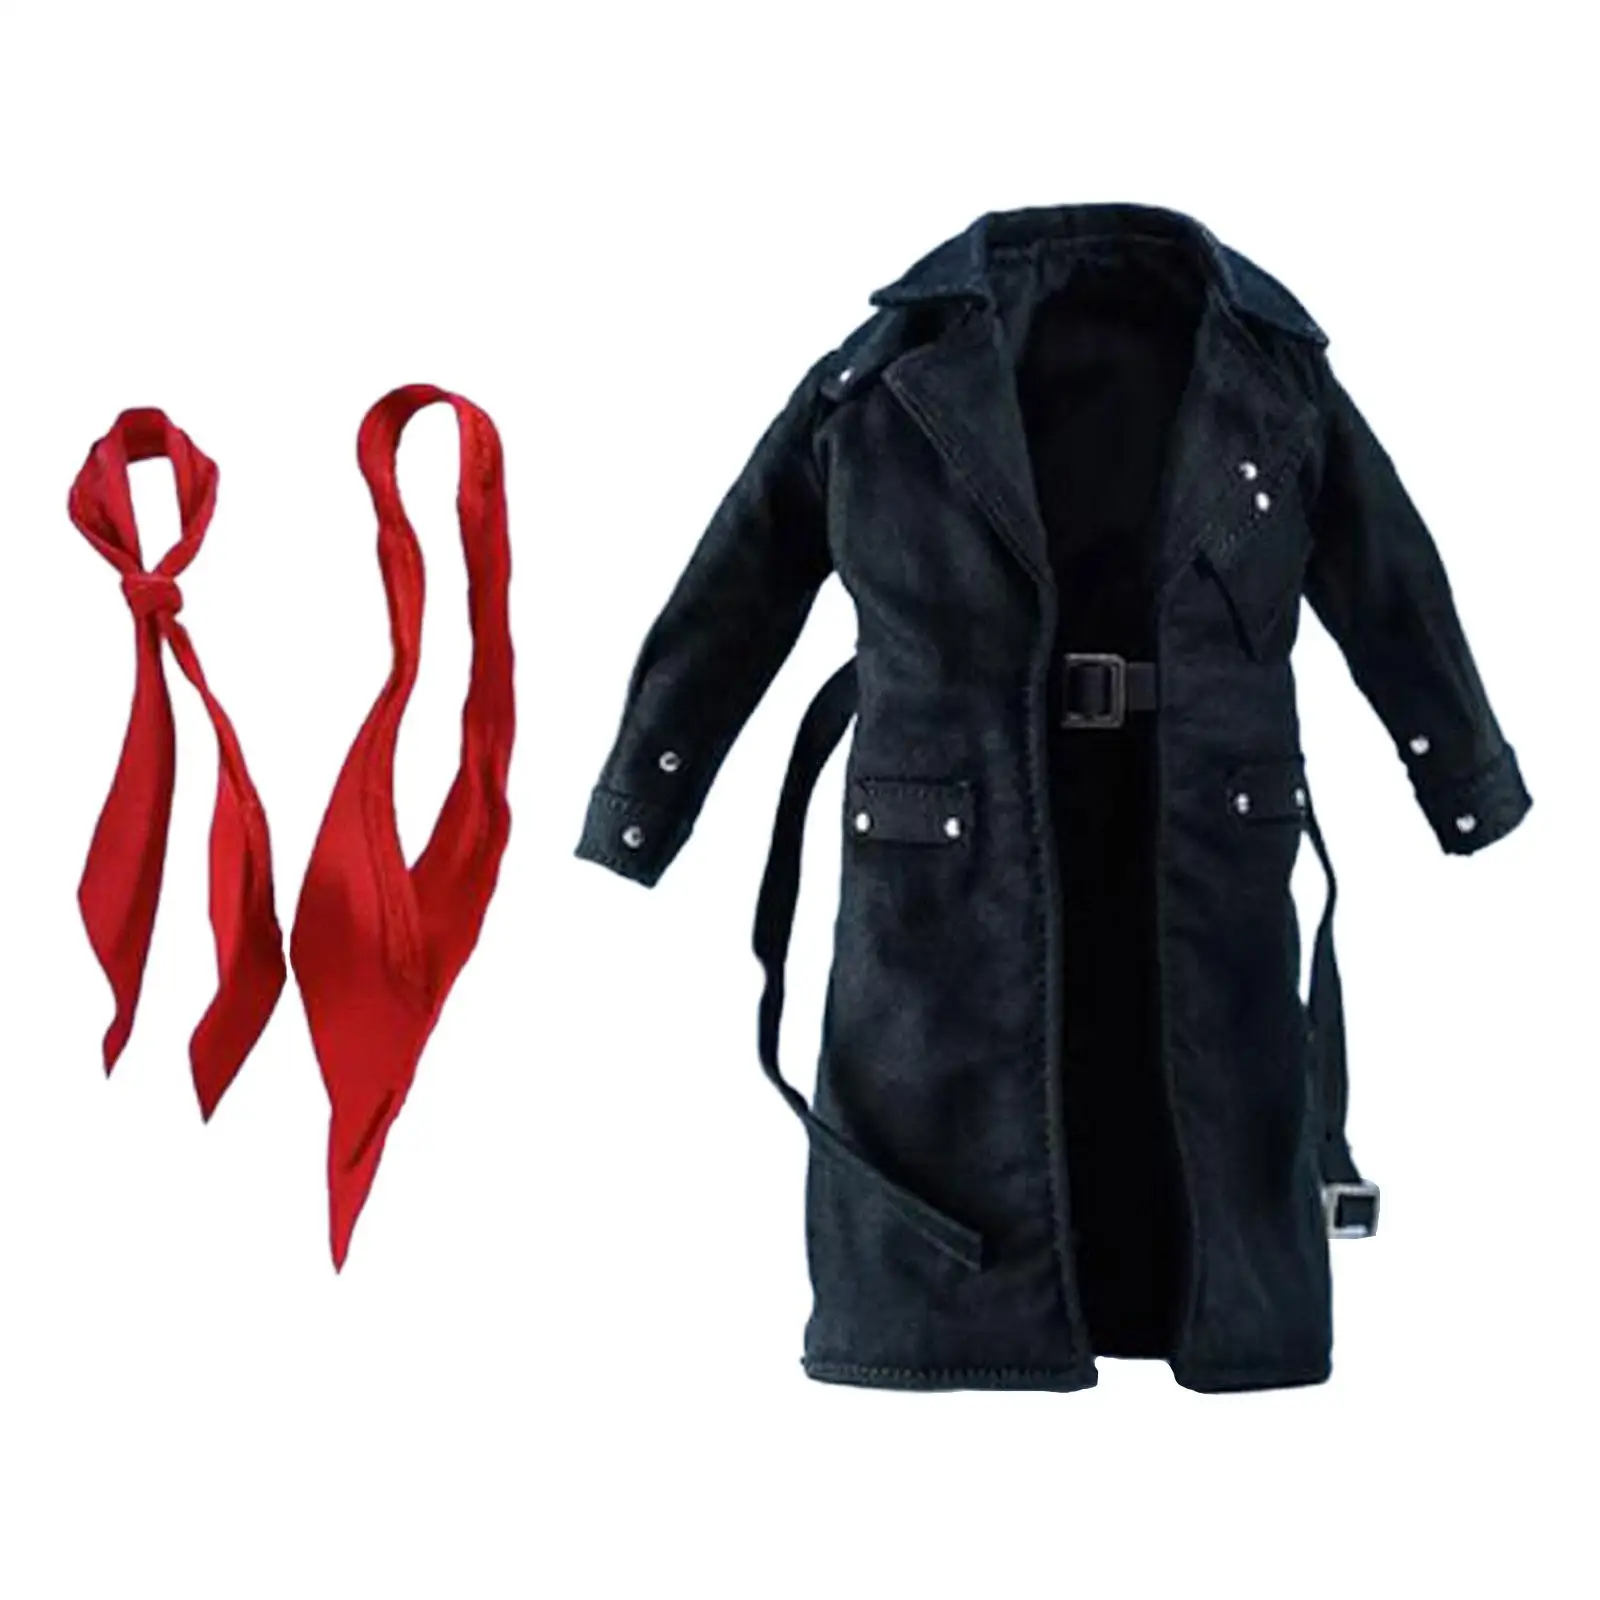 1/12 Scale Wired Trench Coat Costume Stylish Dolls Dress up Male Figure Coat for 6`` inch Soldier Figures Accessories